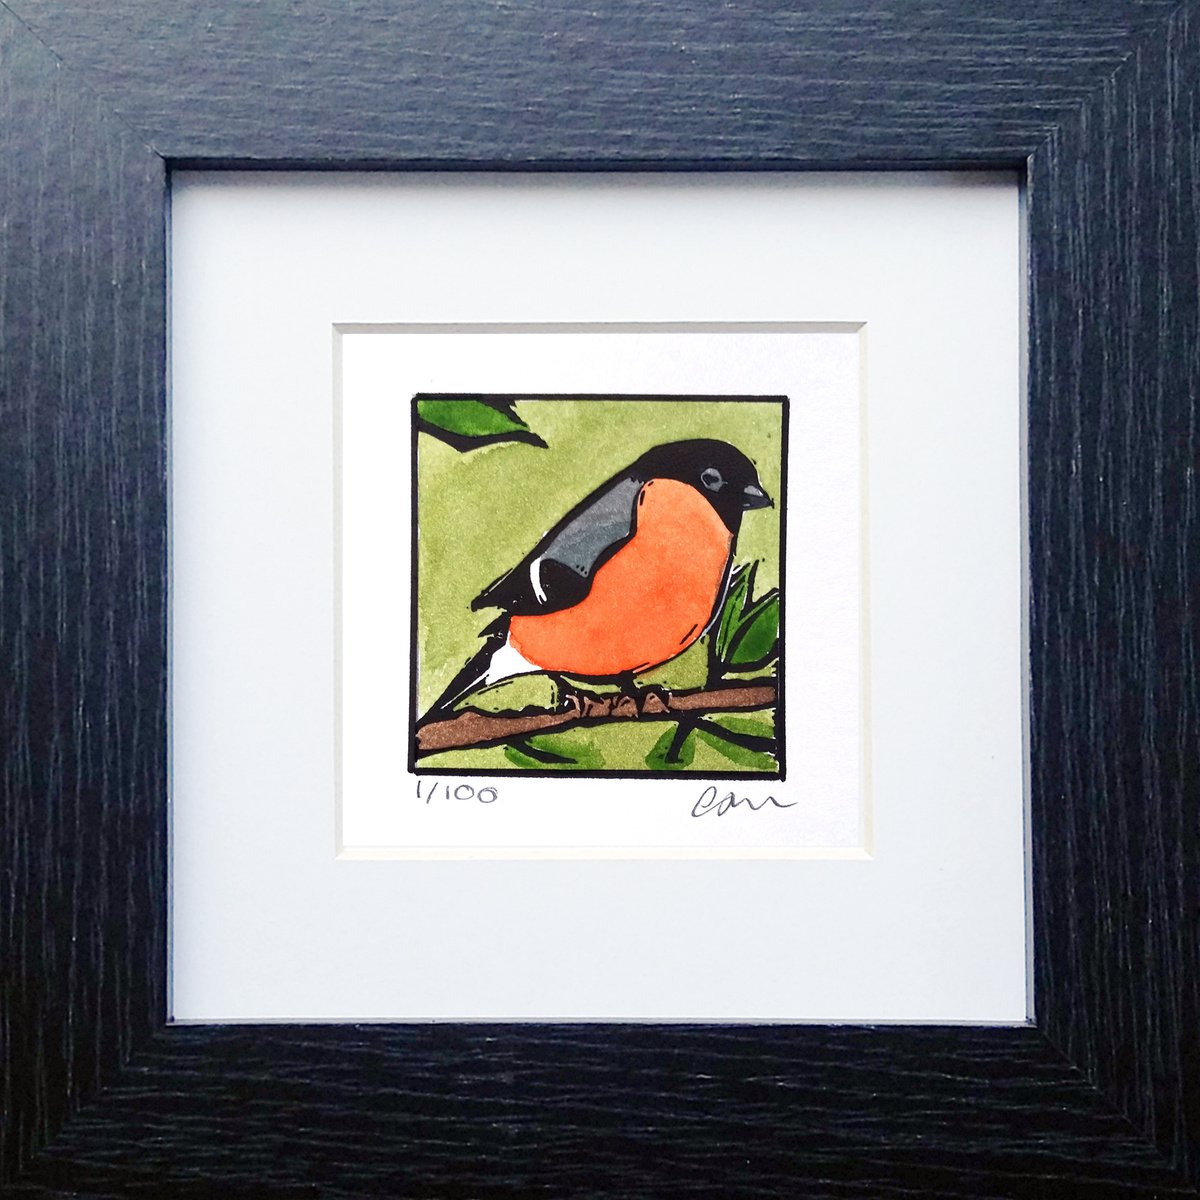 Bullfinch - miniature hand painted linocut print - Framed and ready to hang by Carolynne Coulson